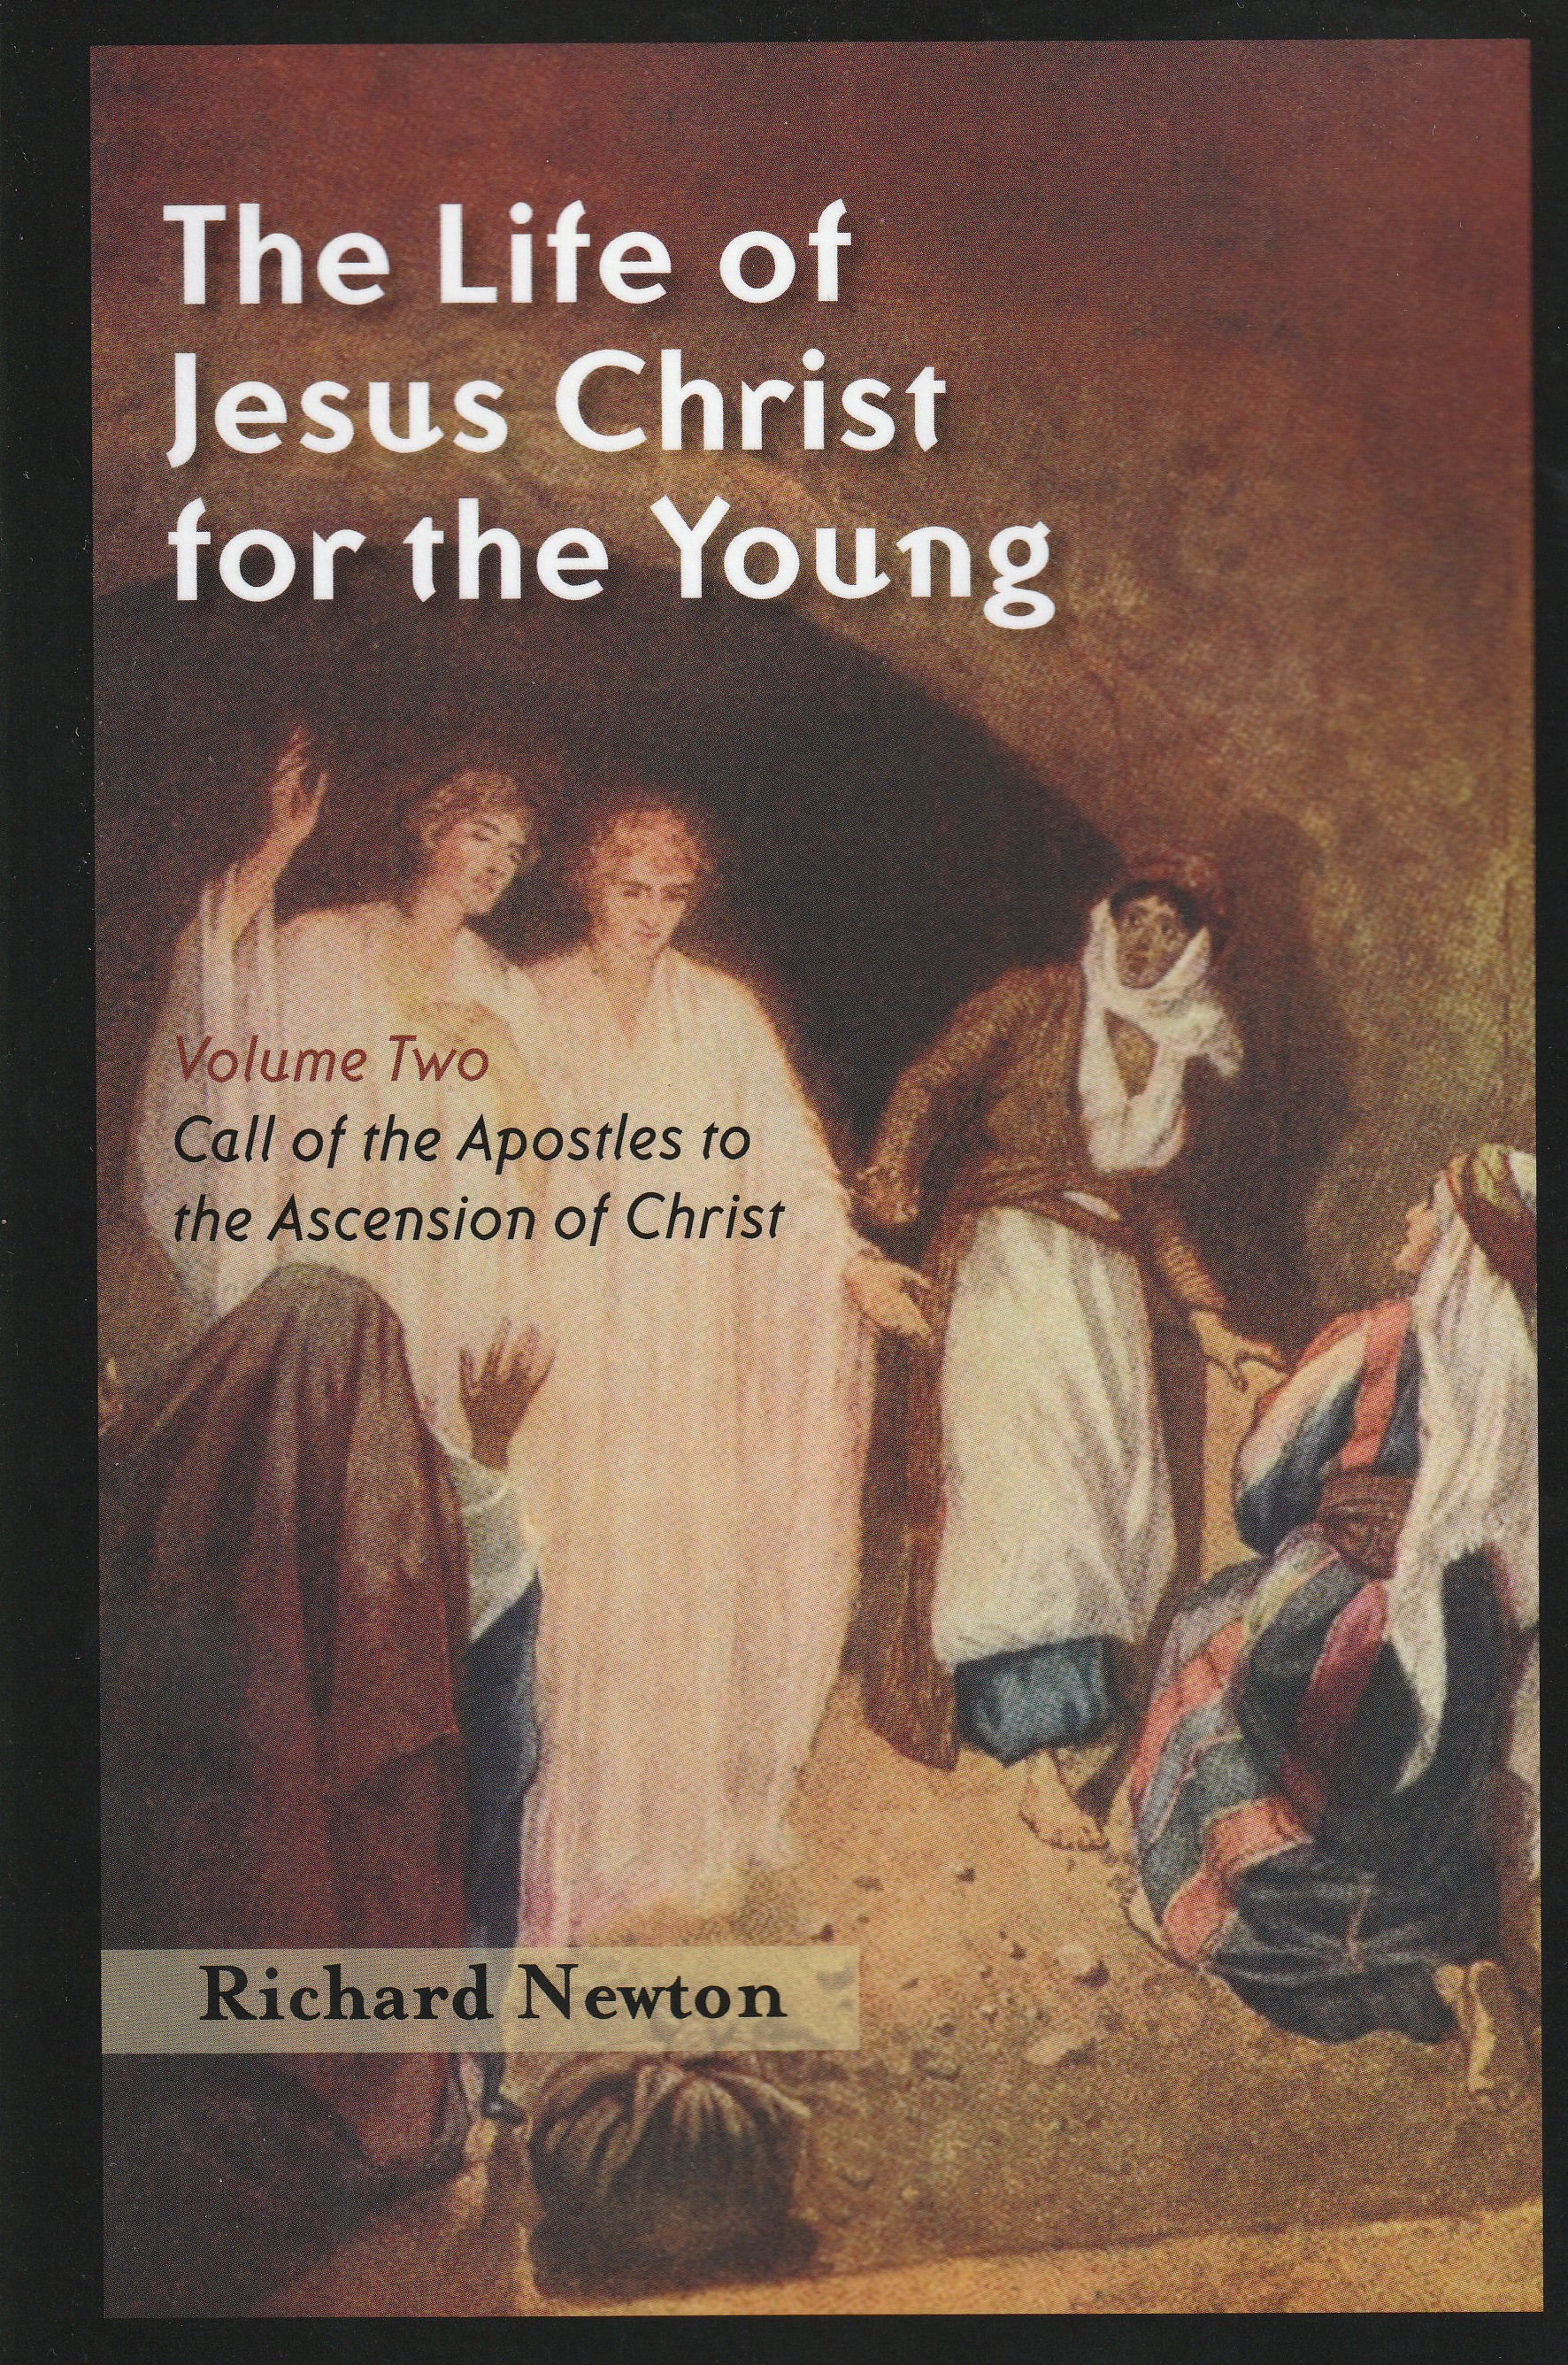 The Life of Jesus Christ for the Young Vol. 2